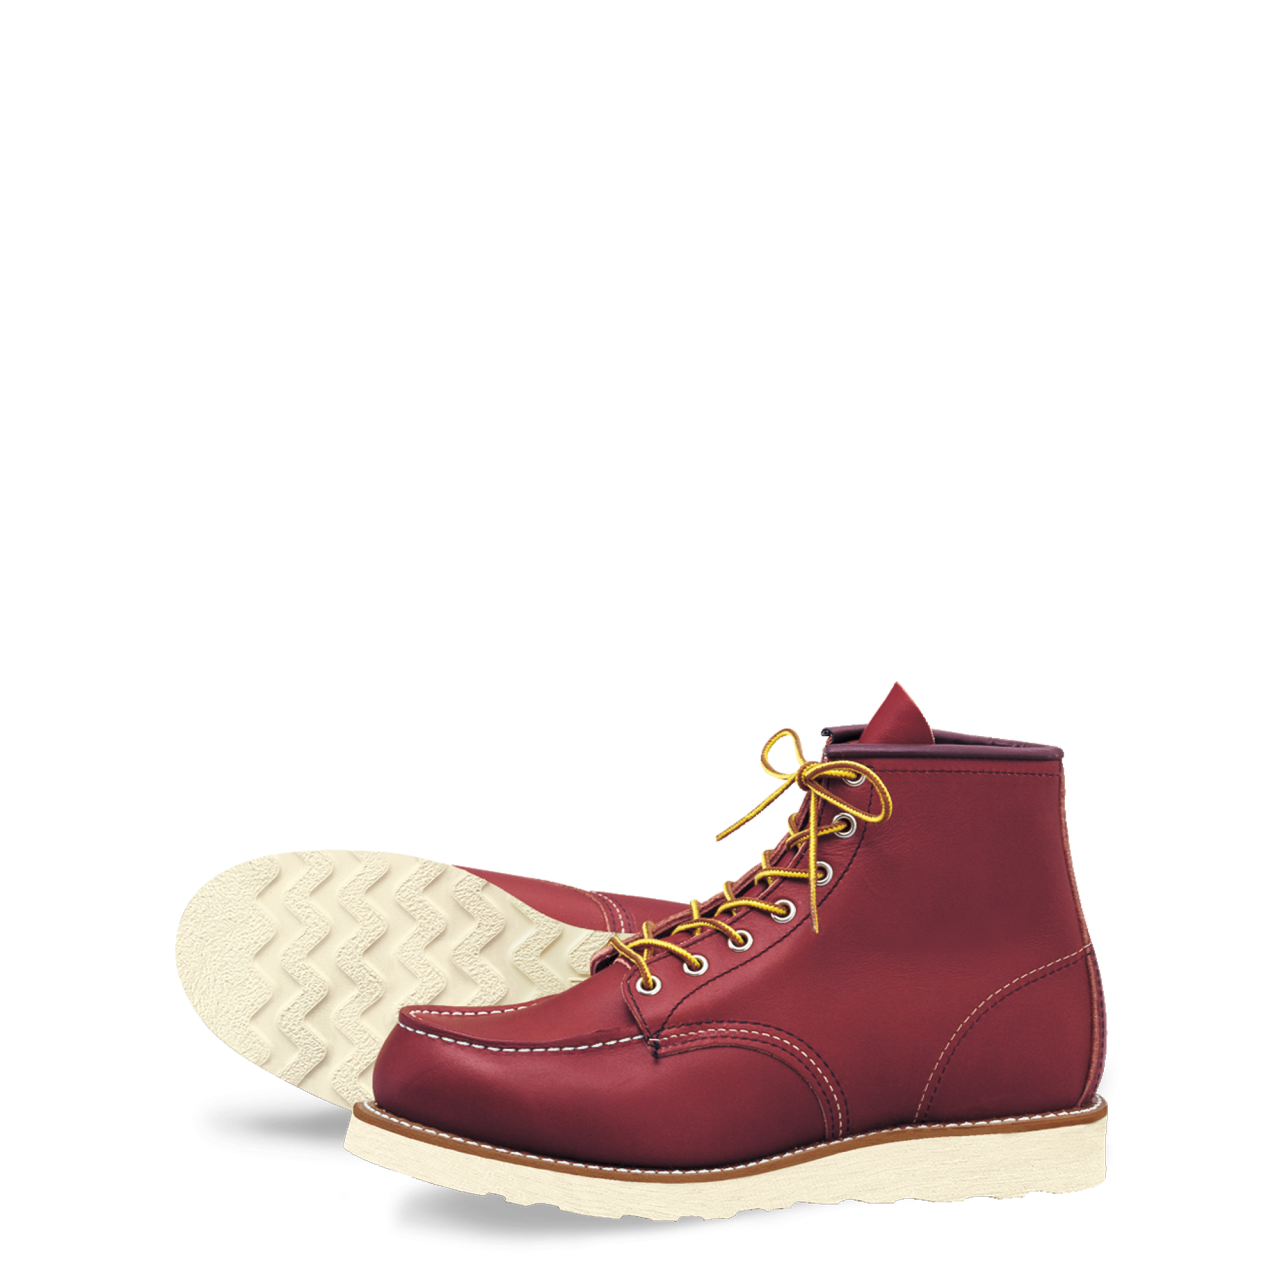 Red Wing 875 Moc Toe